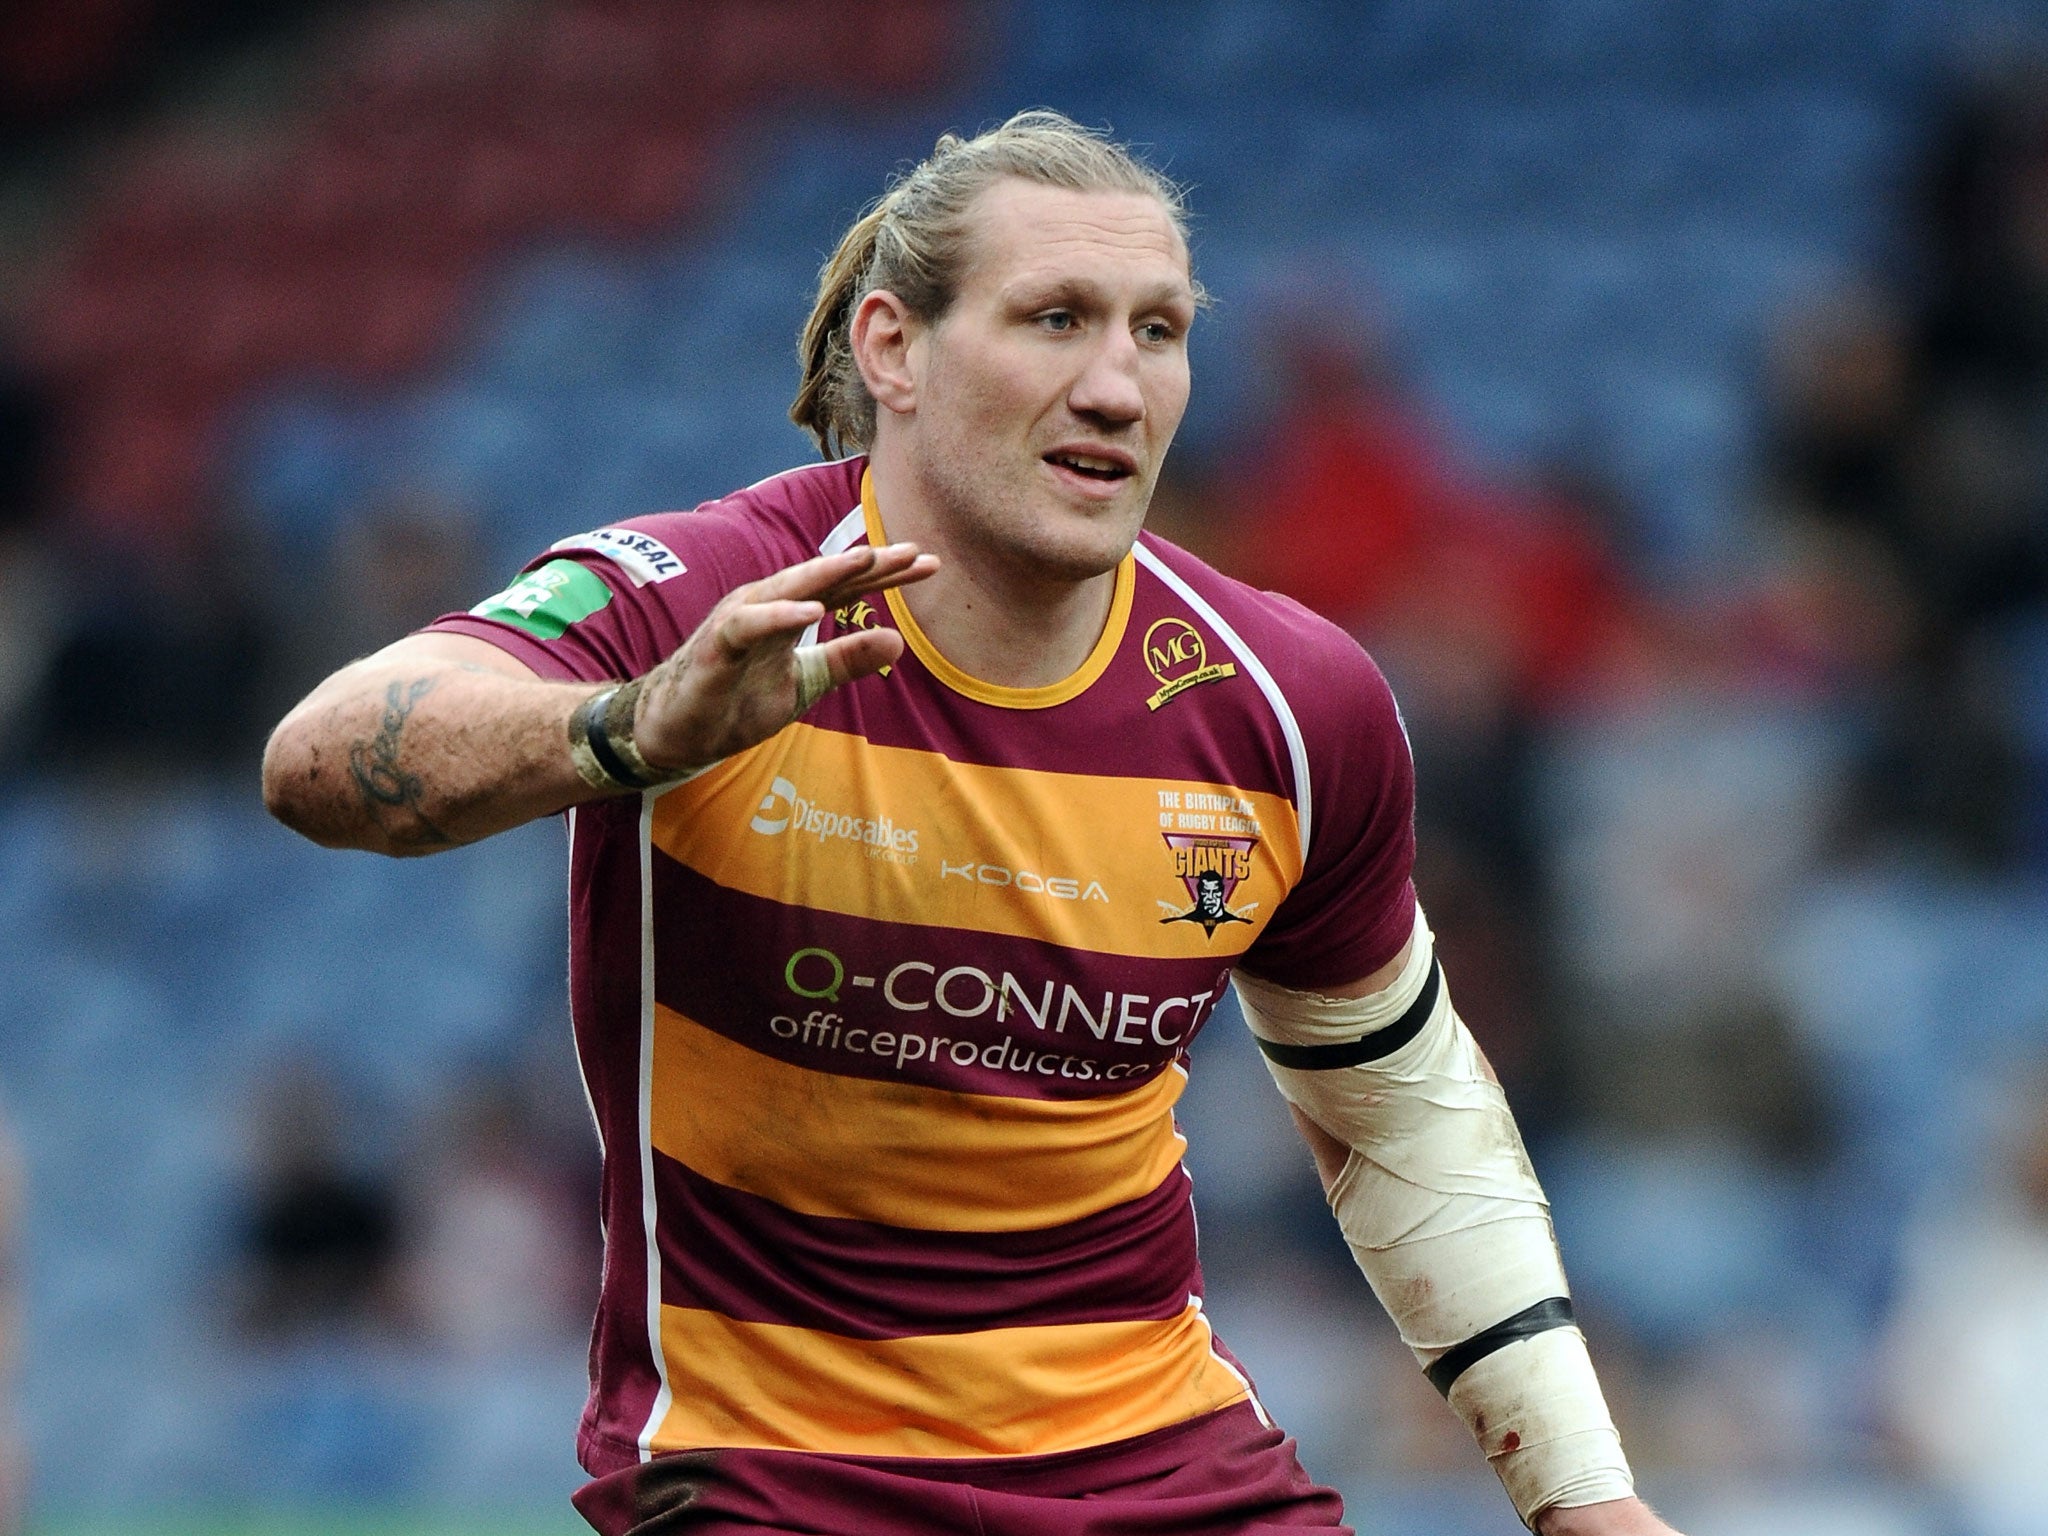 Eorl Crabtree crossed the line for Huddersfield in their 26-12 win over London Broncos